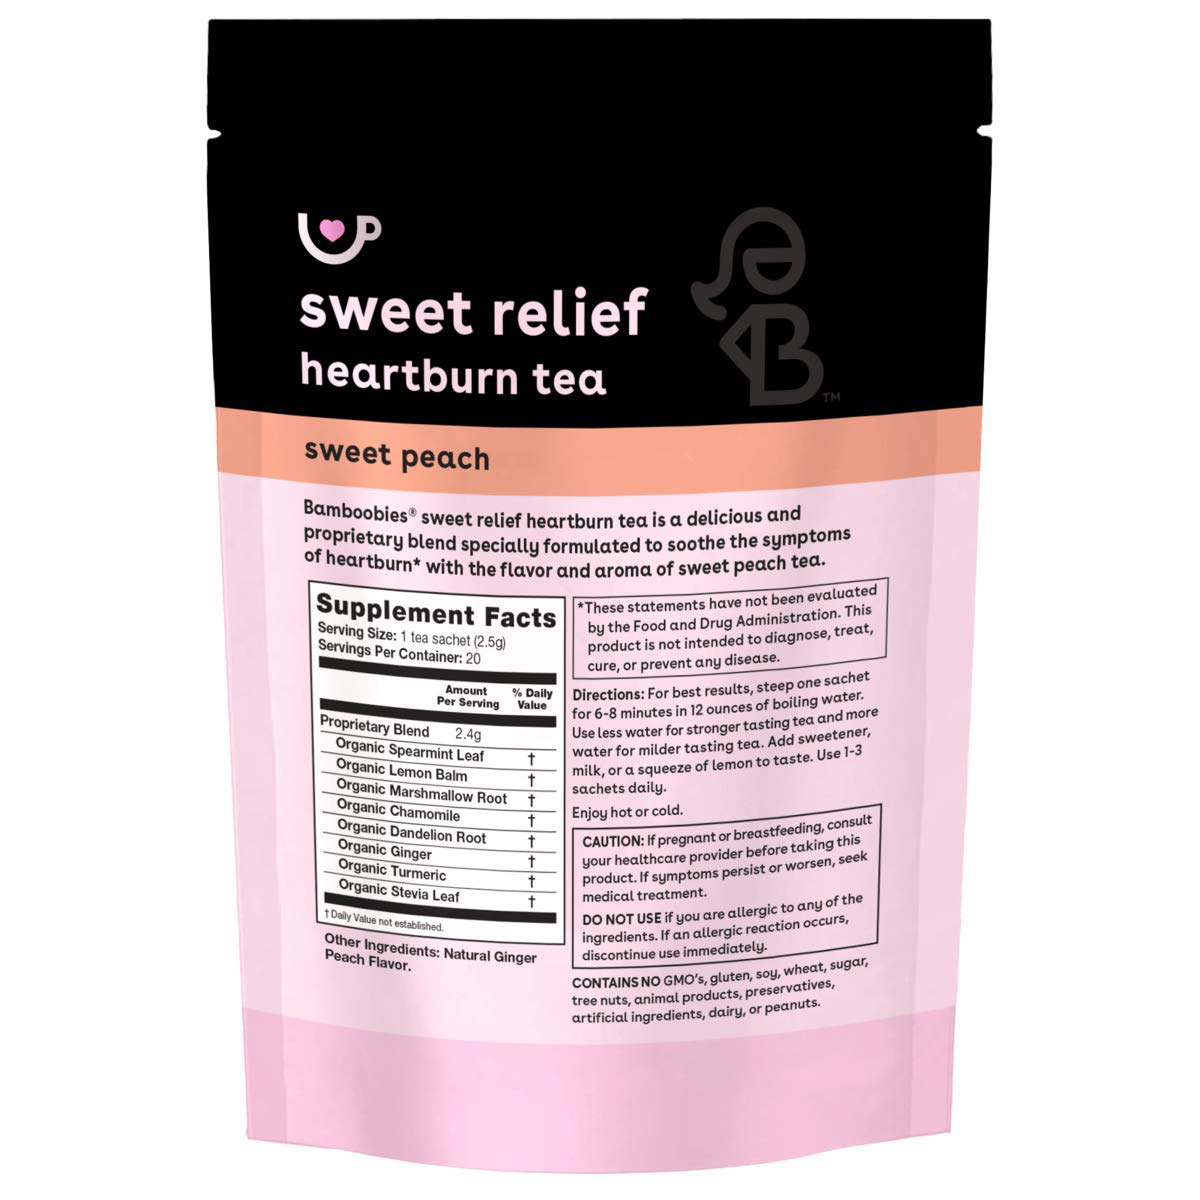 Bamboobies Women’s Lactation Support Drink Mix, Chocolate, Supplement Packets for Breastfeeding, 20 Packets